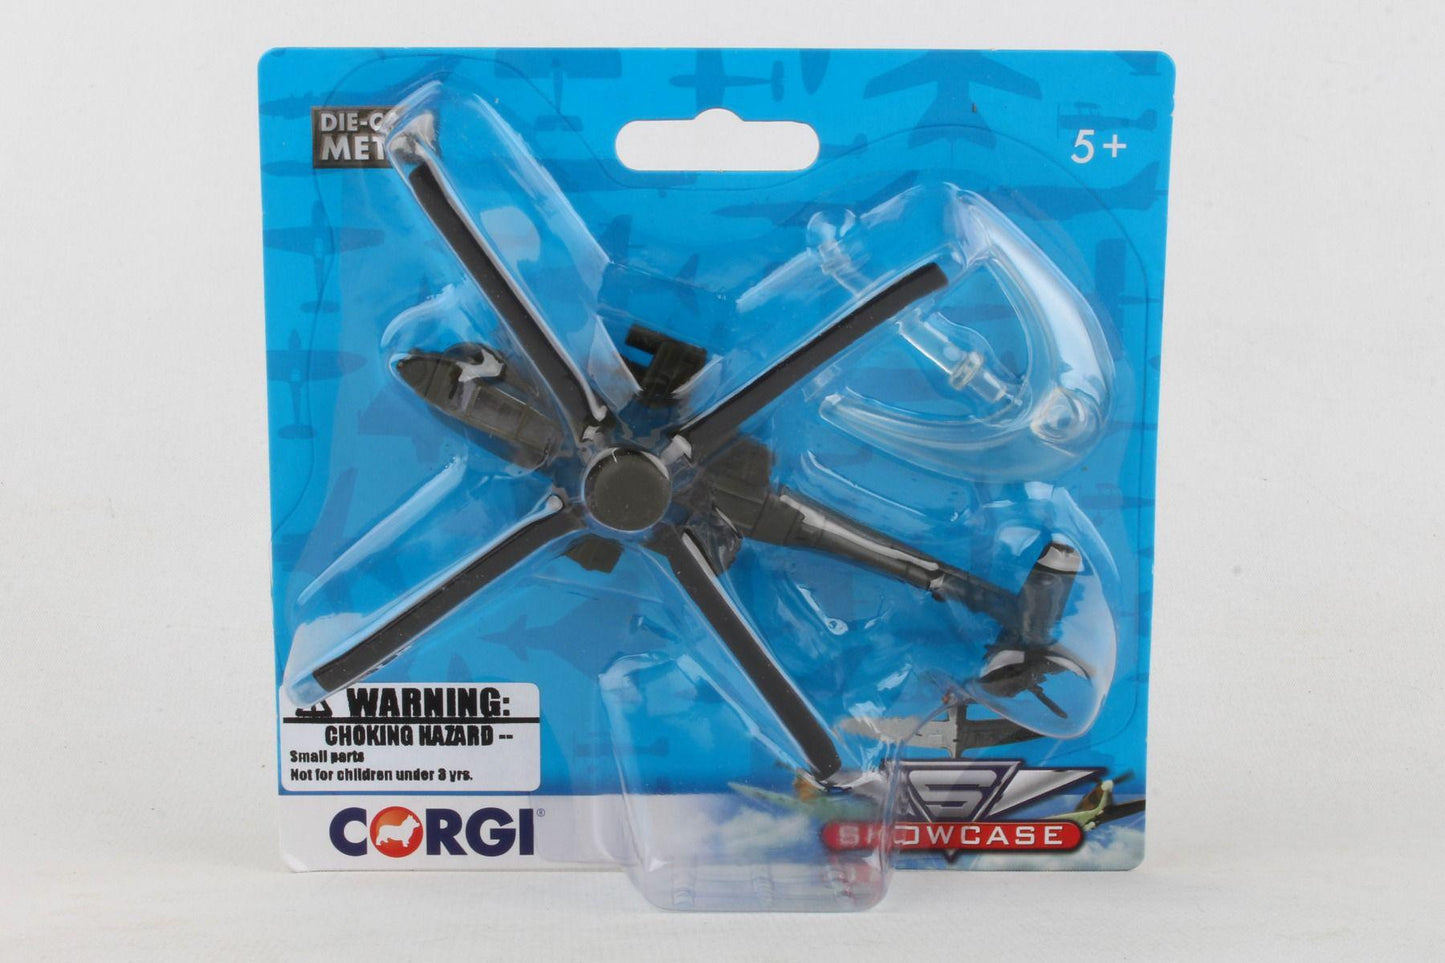 Corgi Showcase Apache Helicopter Military Aviation Die-Cast Metal Model - Makes a perfect gift for any person interested in aviation!